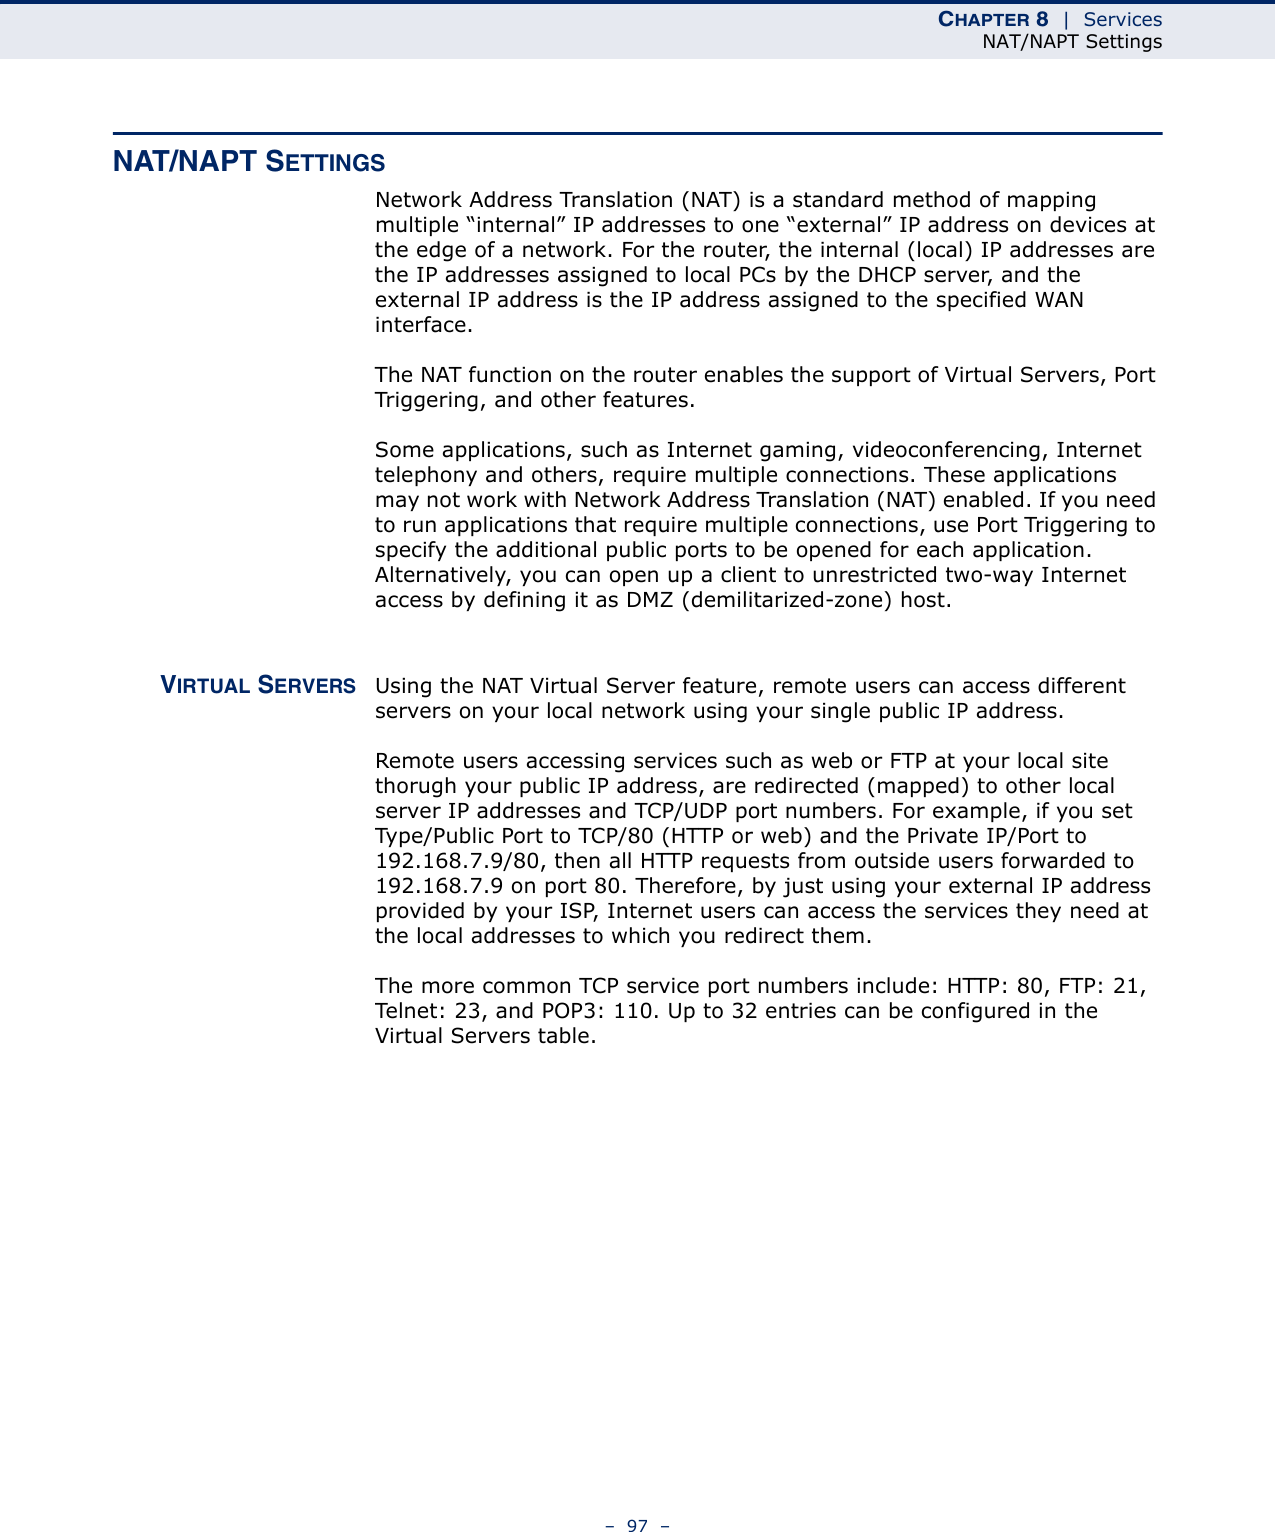 CHAPTER 8  |  ServicesNAT/NAPT Settings–  97  –NAT/NAPT SETTINGSNetwork Address Translation (NAT) is a standard method of mapping multiple “internal” IP addresses to one “external” IP address on devices at the edge of a network. For the router, the internal (local) IP addresses are the IP addresses assigned to local PCs by the DHCP server, and the external IP address is the IP address assigned to the specified WAN interface. The NAT function on the router enables the support of Virtual Servers, Port Triggering, and other features. Some applications, such as Internet gaming, videoconferencing, Internet telephony and others, require multiple connections. These applications may not work with Network Address Translation (NAT) enabled. If you need to run applications that require multiple connections, use Port Triggering to specify the additional public ports to be opened for each application. Alternatively, you can open up a client to unrestricted two-way Internet access by defining it as DMZ (demilitarized-zone) host.VIRTUAL SERVERS Using the NAT Virtual Server feature, remote users can access different servers on your local network using your single public IP address.Remote users accessing services such as web or FTP at your local site thorugh your public IP address, are redirected (mapped) to other local server IP addresses and TCP/UDP port numbers. For example, if you set Type/Public Port to TCP/80 (HTTP or web) and the Private IP/Port to 192.168.7.9/80, then all HTTP requests from outside users forwarded to 192.168.7.9 on port 80. Therefore, by just using your external IP address provided by your ISP, Internet users can access the services they need at the local addresses to which you redirect them.The more common TCP service port numbers include: HTTP: 80, FTP: 21, Telnet: 23, and POP3: 110. Up to 32 entries can be configured in the Virtual Servers table.